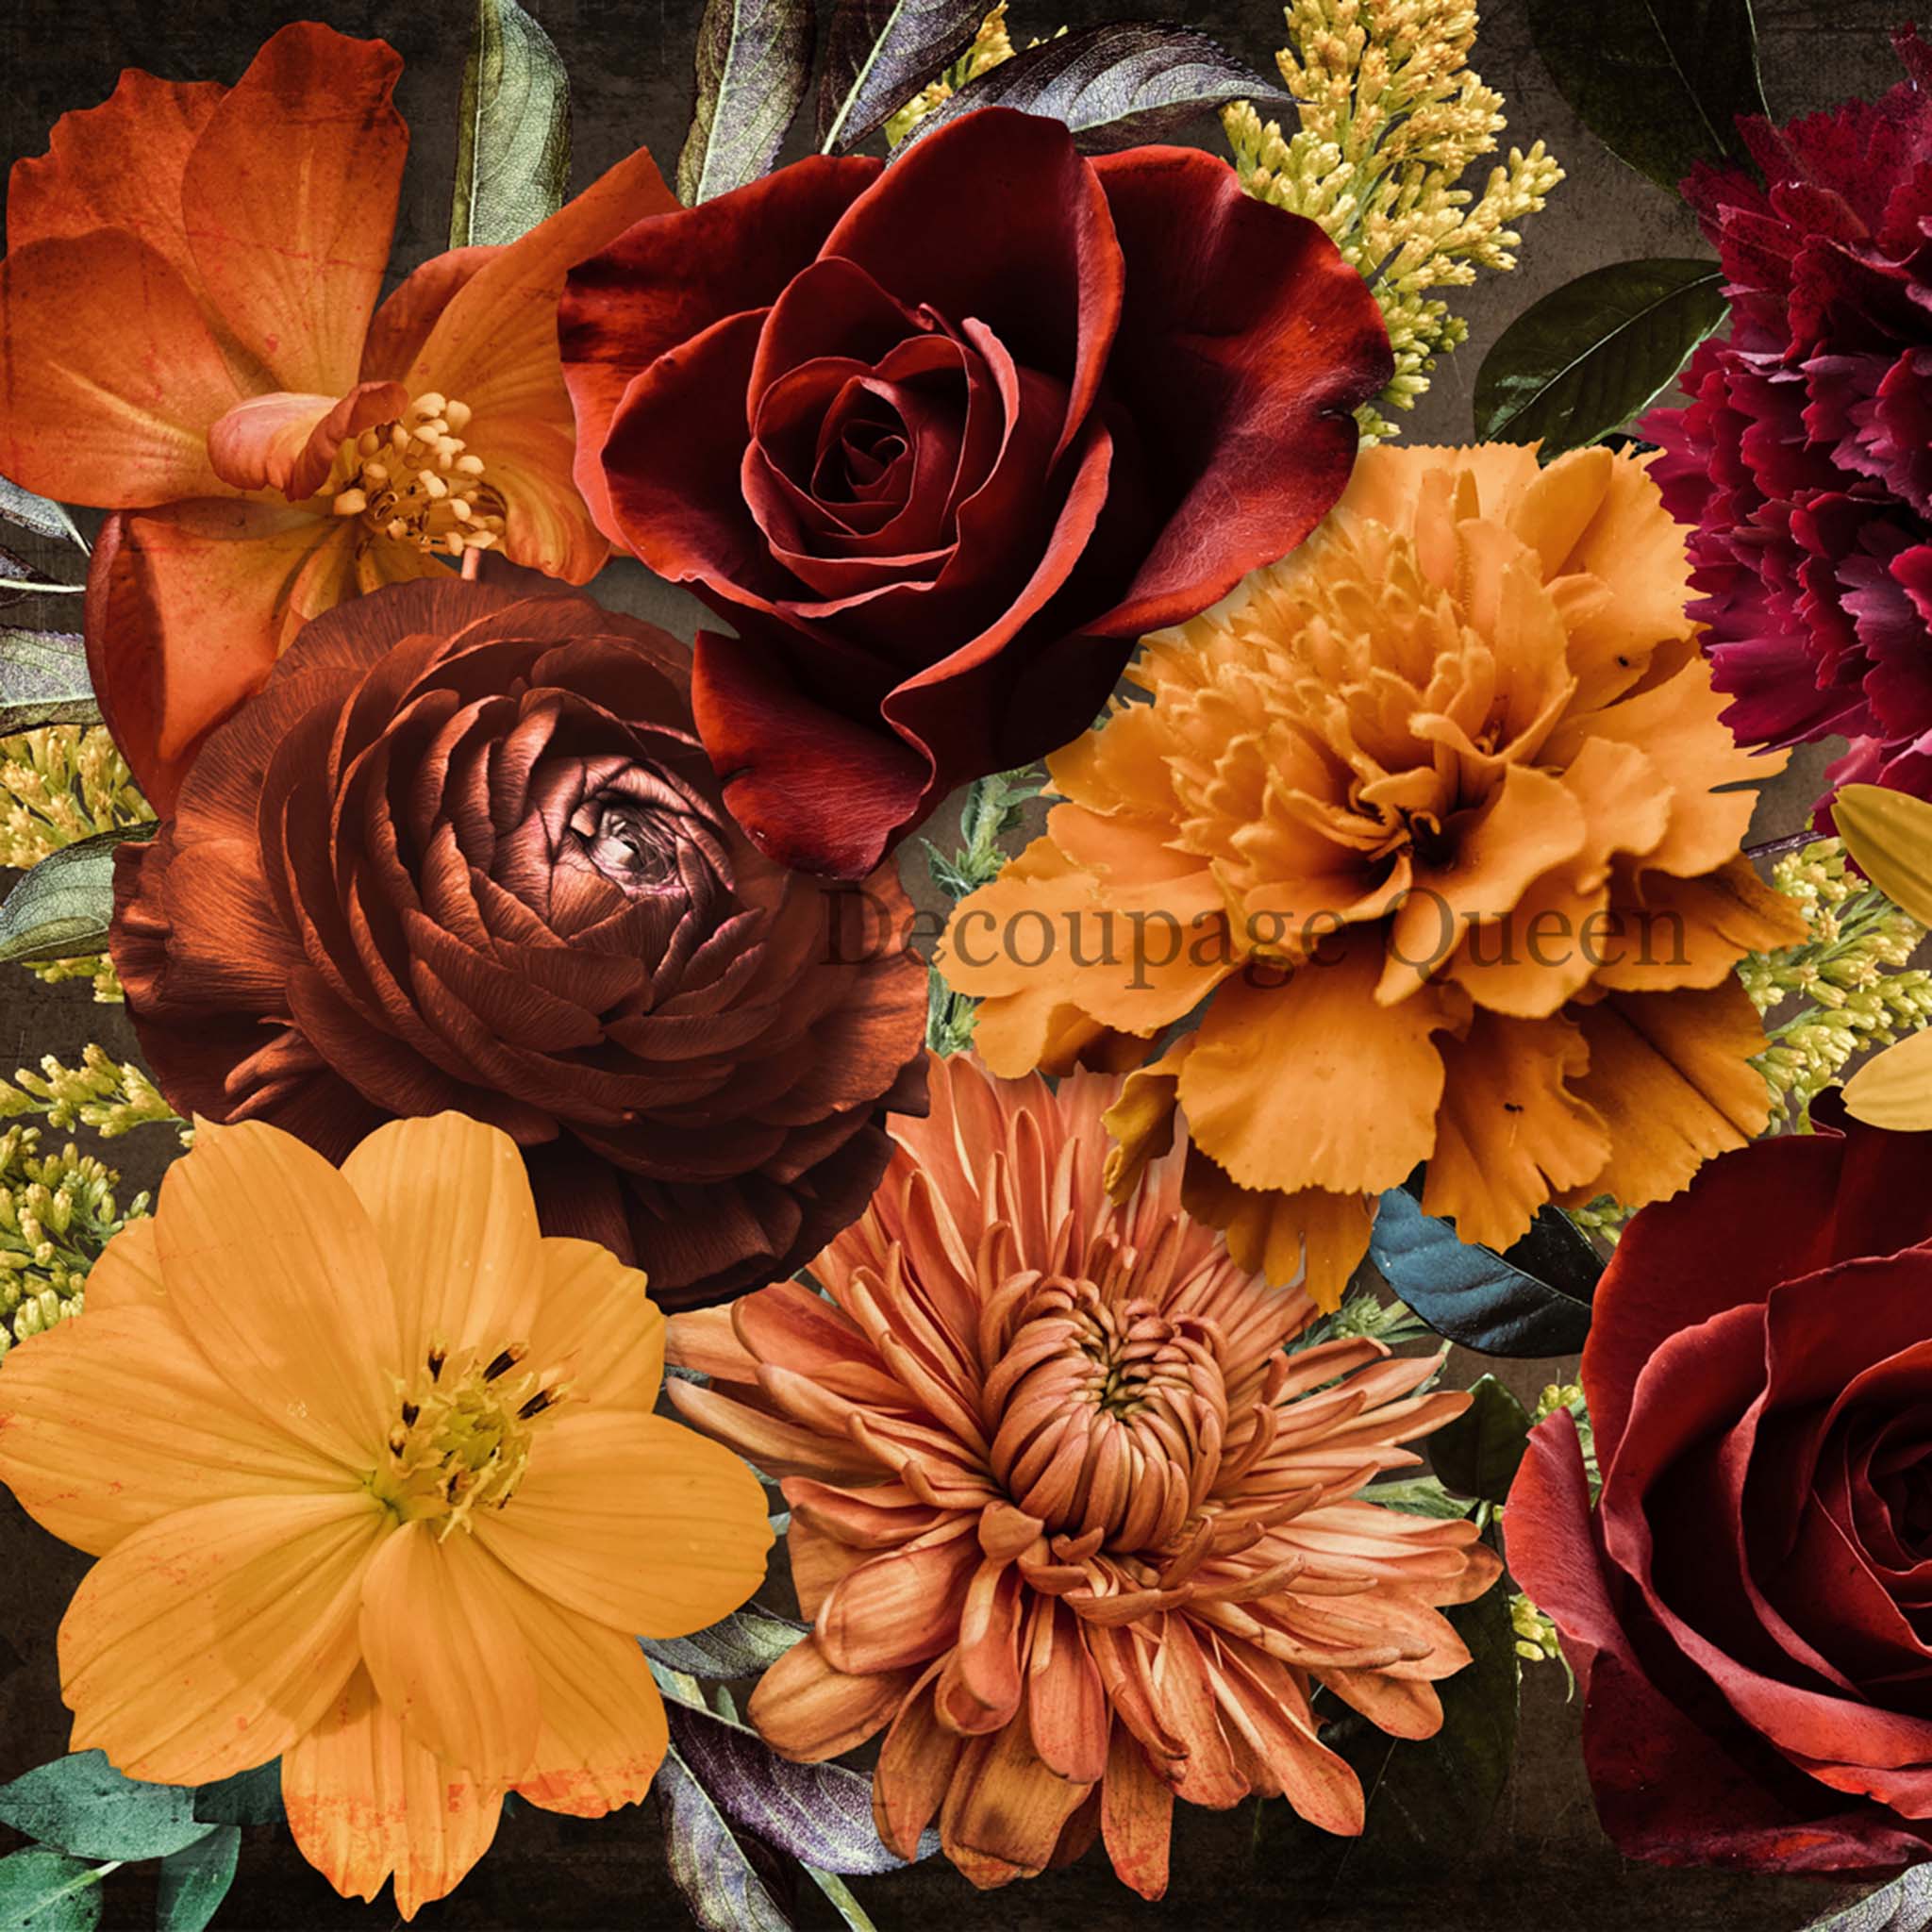 A1 rice paper design that features large burgundy, orange, and autumn colored flowers.